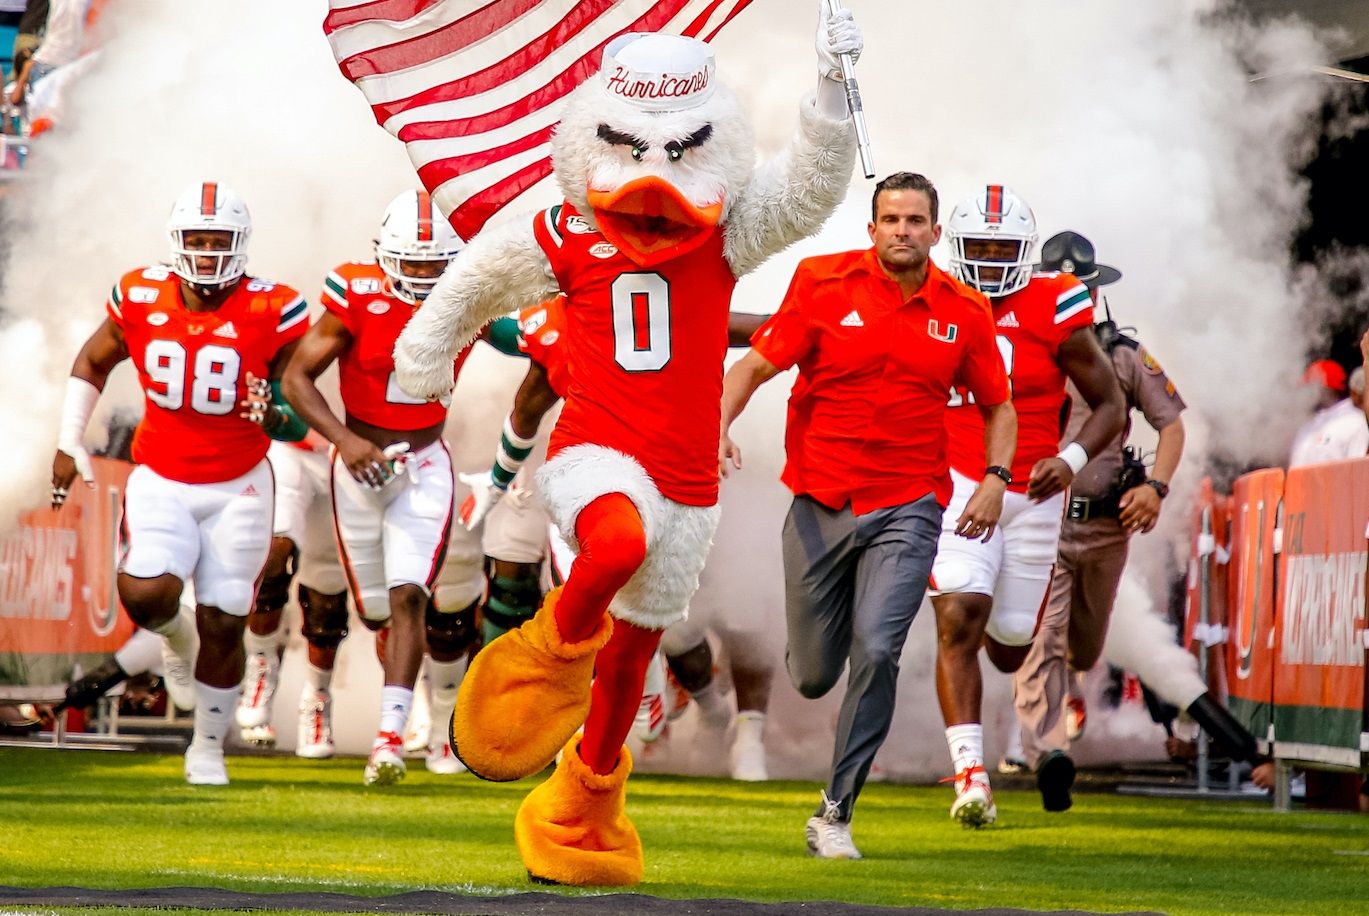 Canes Kick Off in Prime Time on ACCN